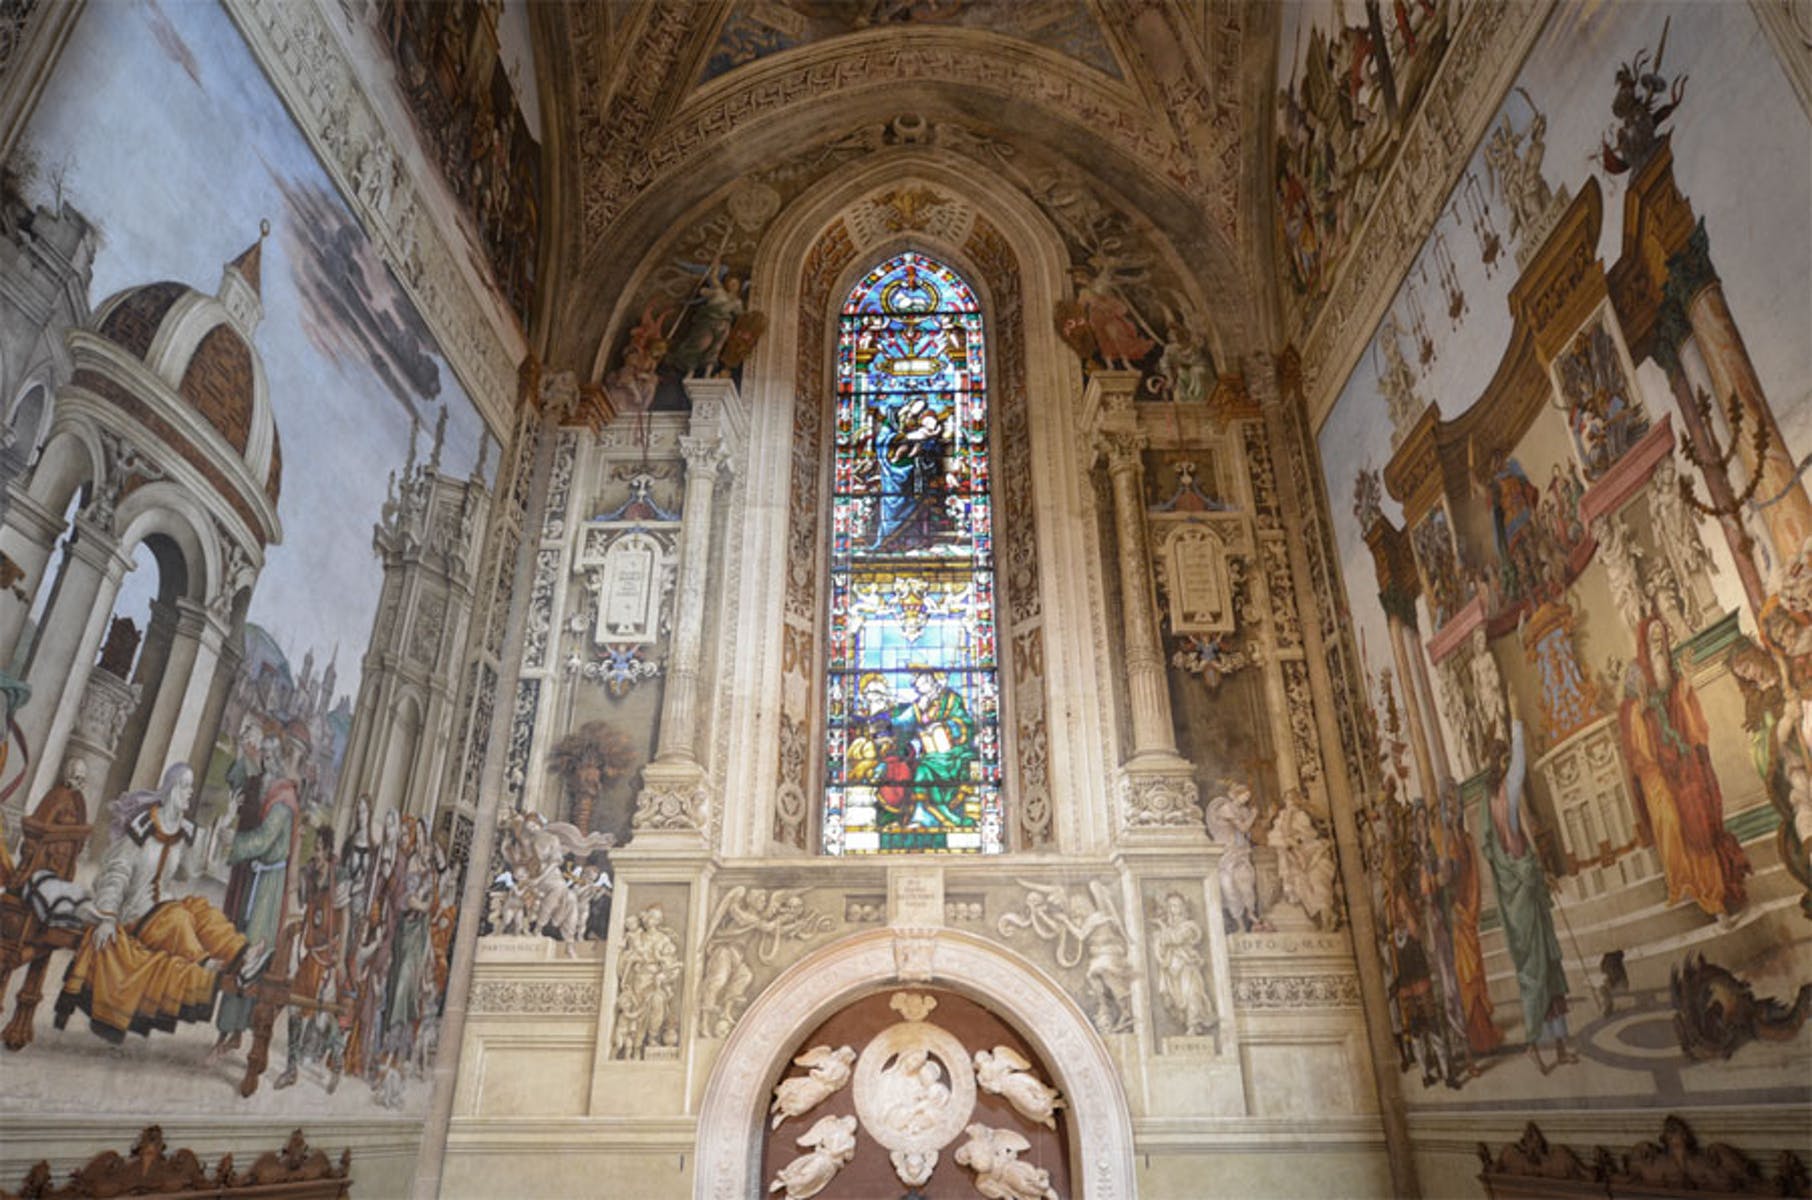 The Strozzi Chapel with frescoes by Filippino Lippi